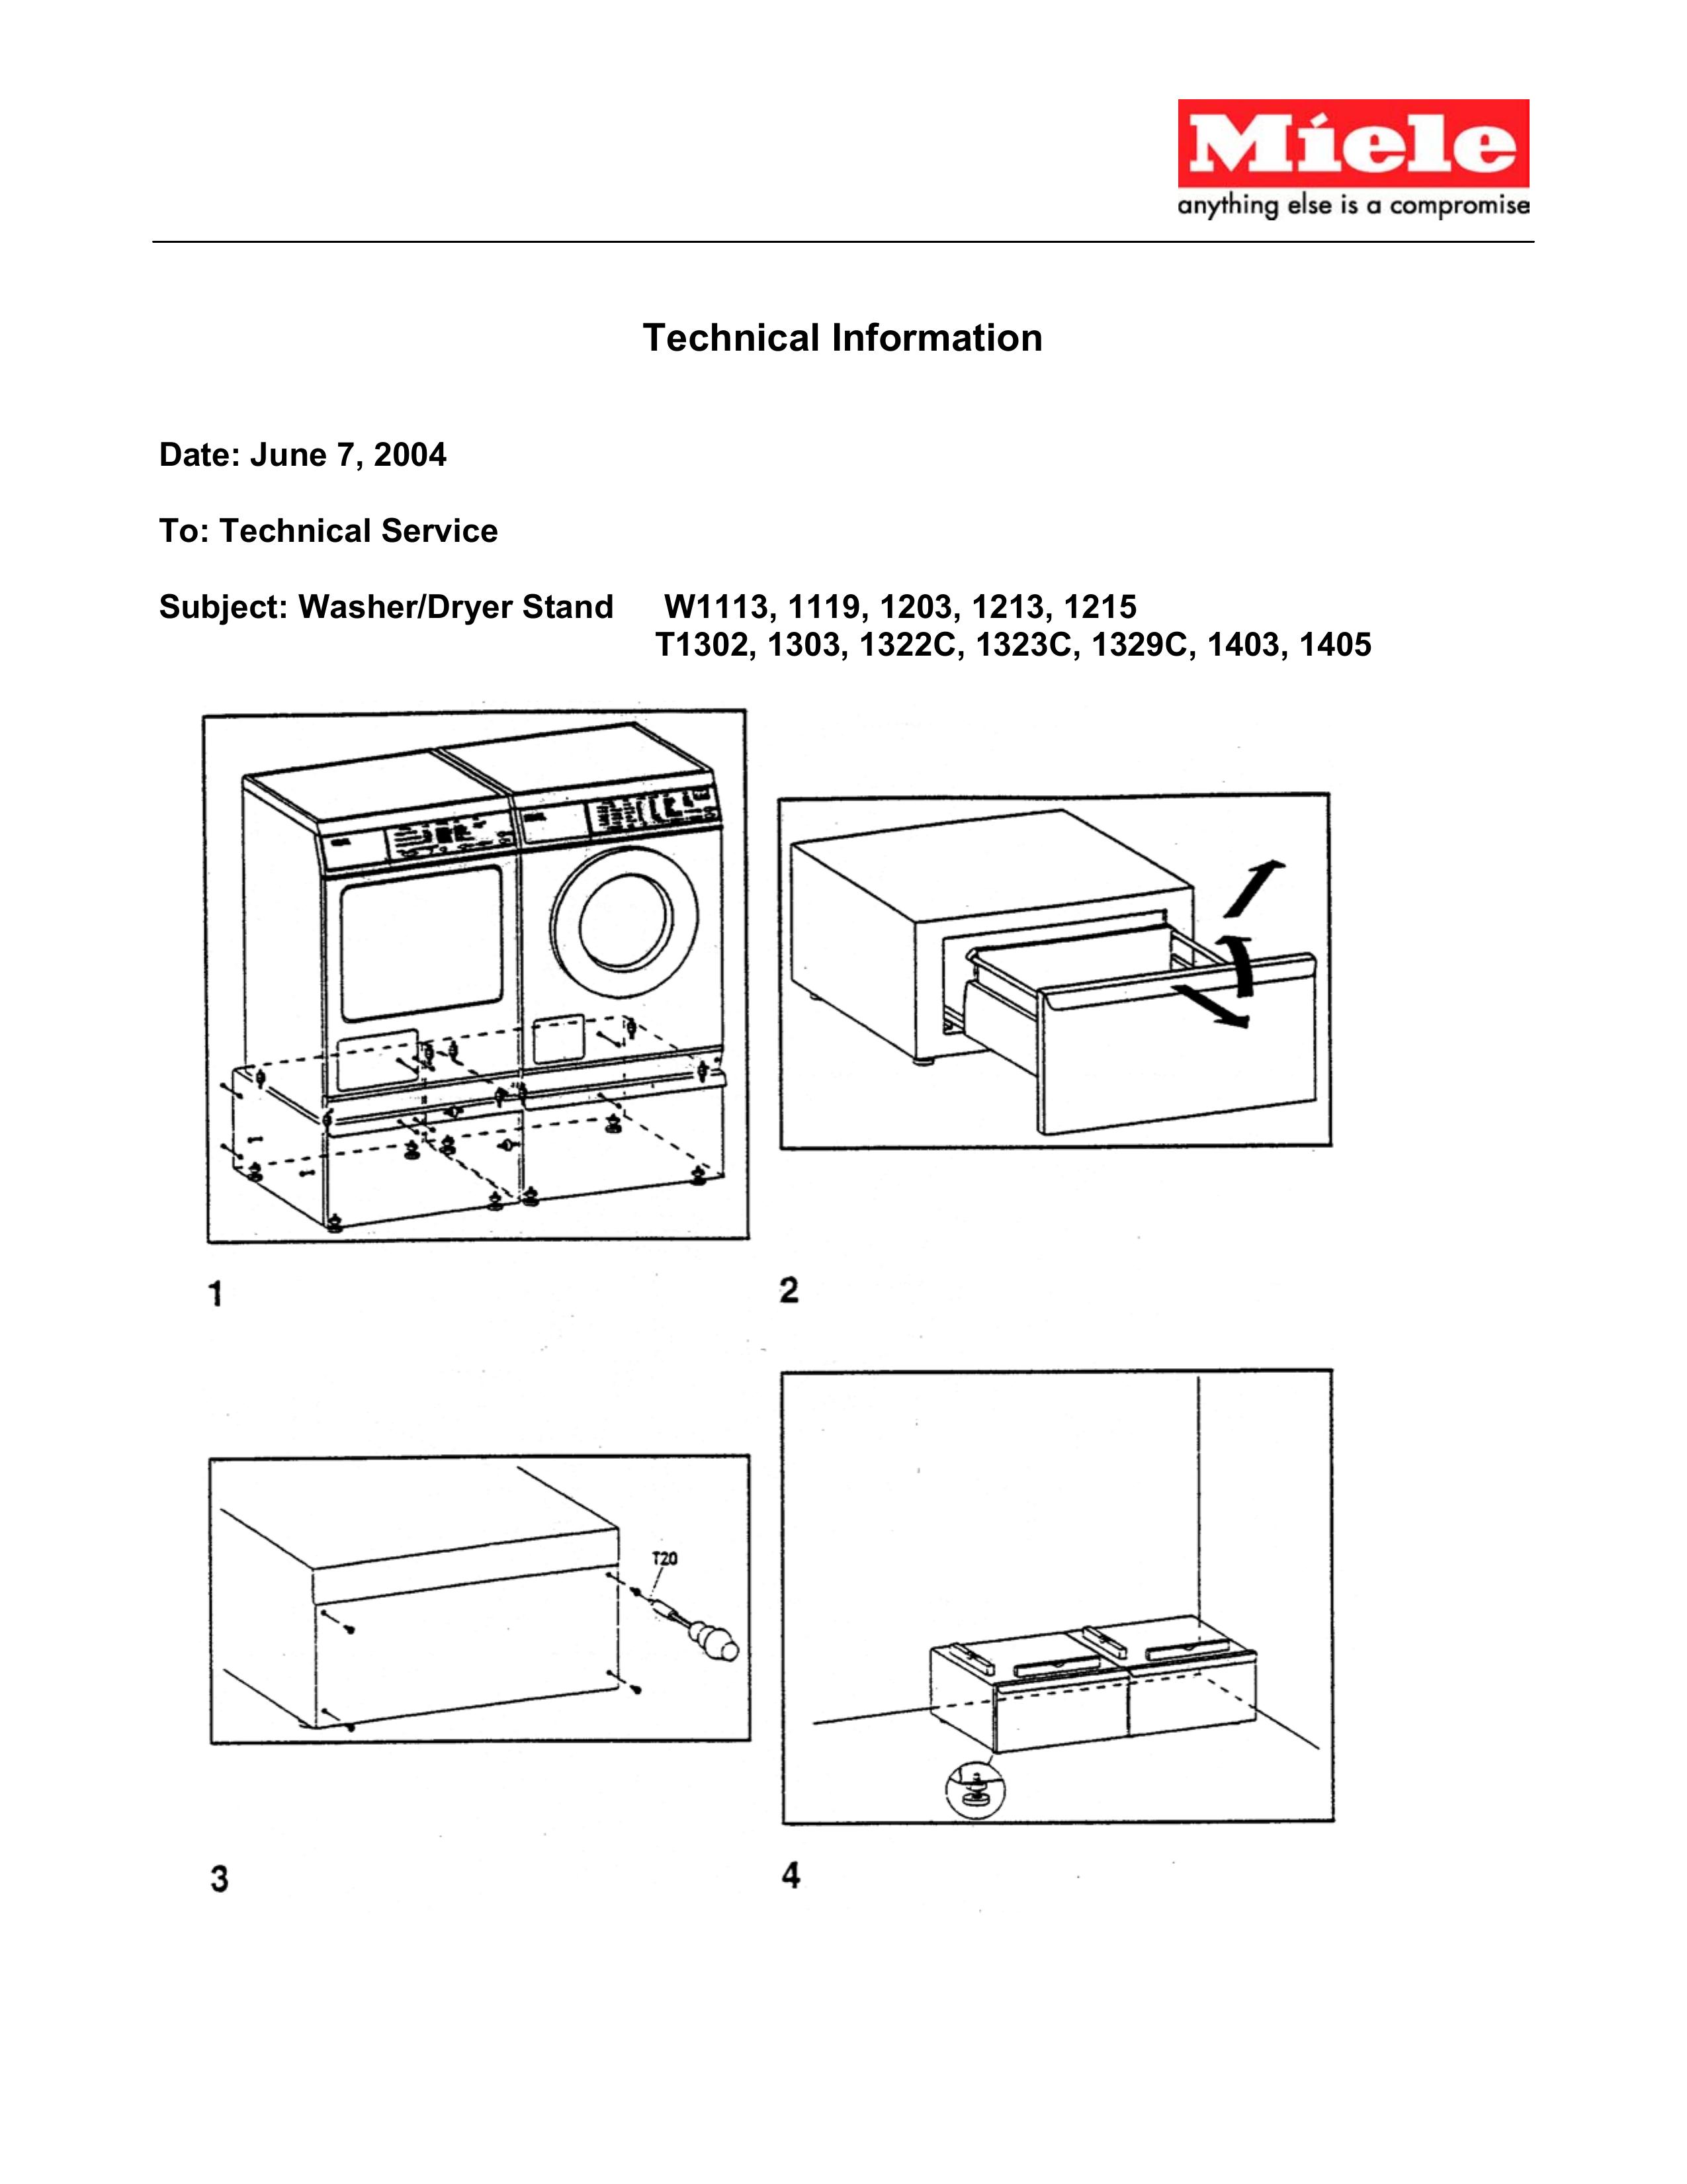 Miele W1215 Washer Accessories User Manual